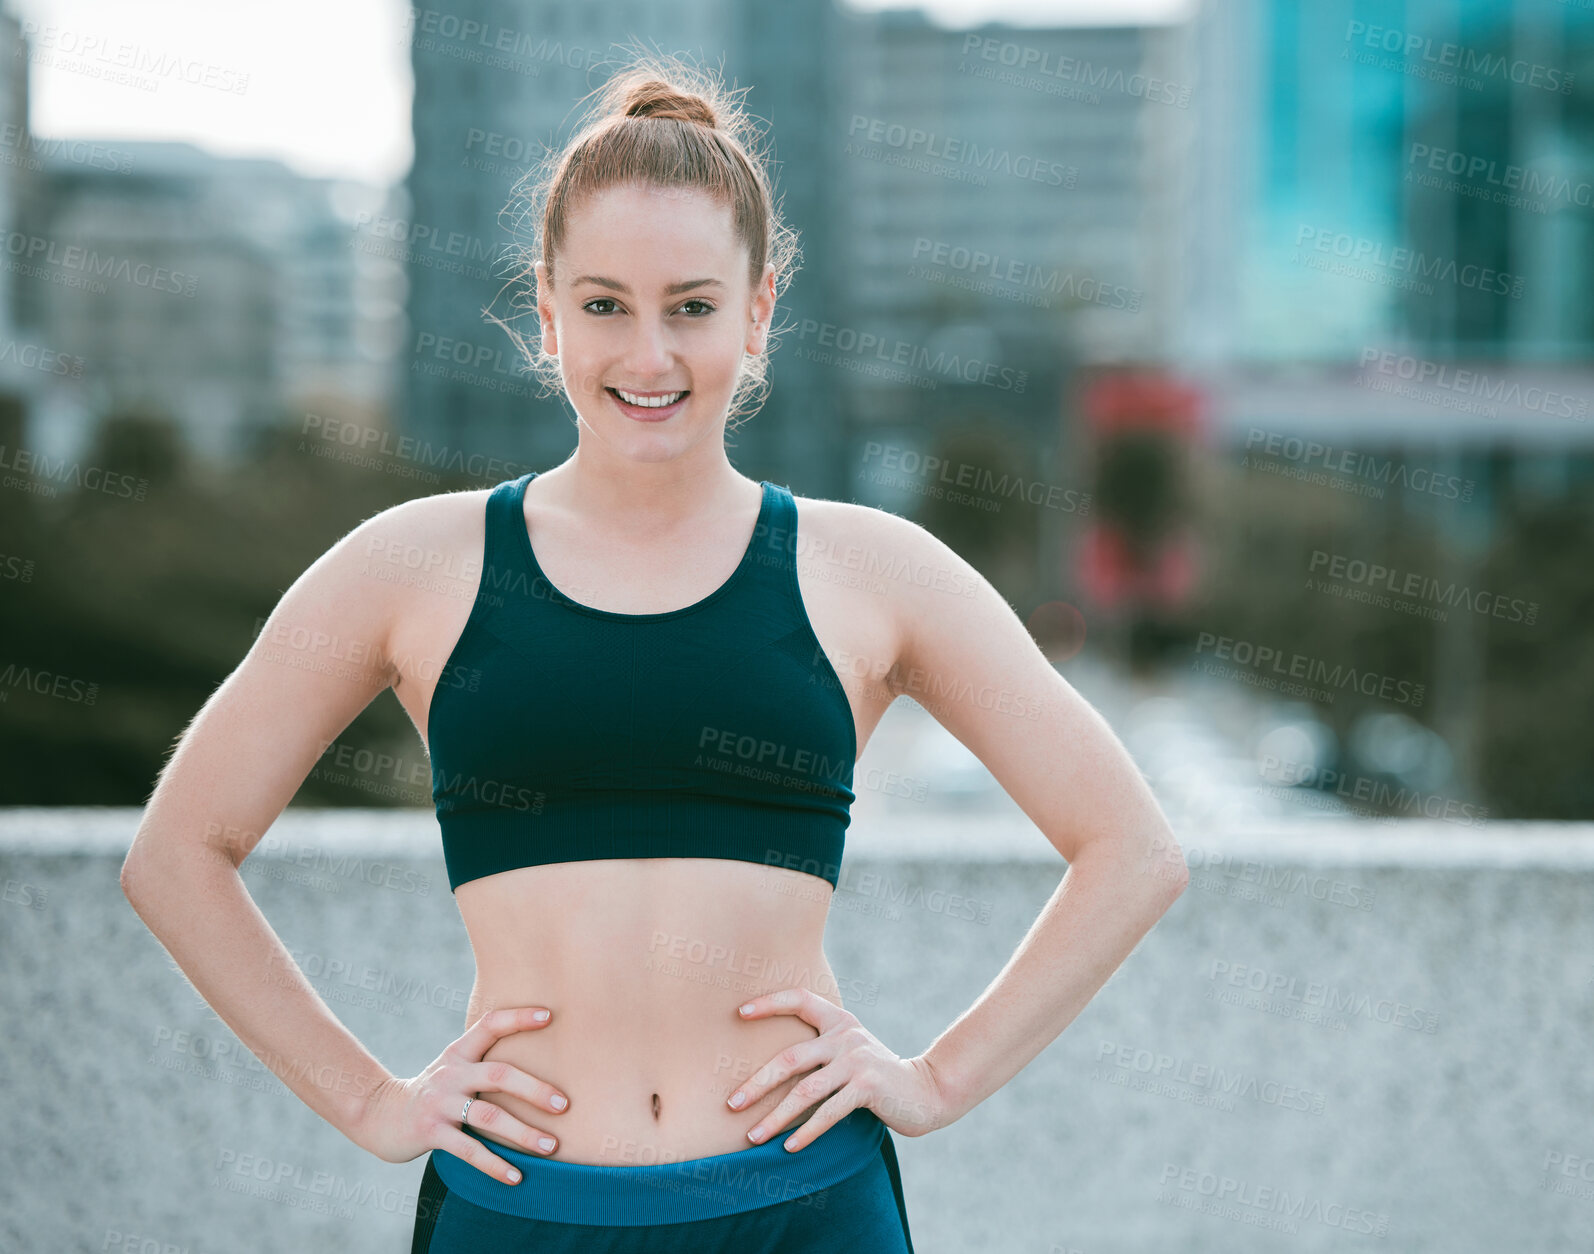 Buy stock photo Portrait of one confident young caucasian woman standing with hands on hips ready for exercise outdoors. Determined female athlete looking happy and motivated for training workout in the city